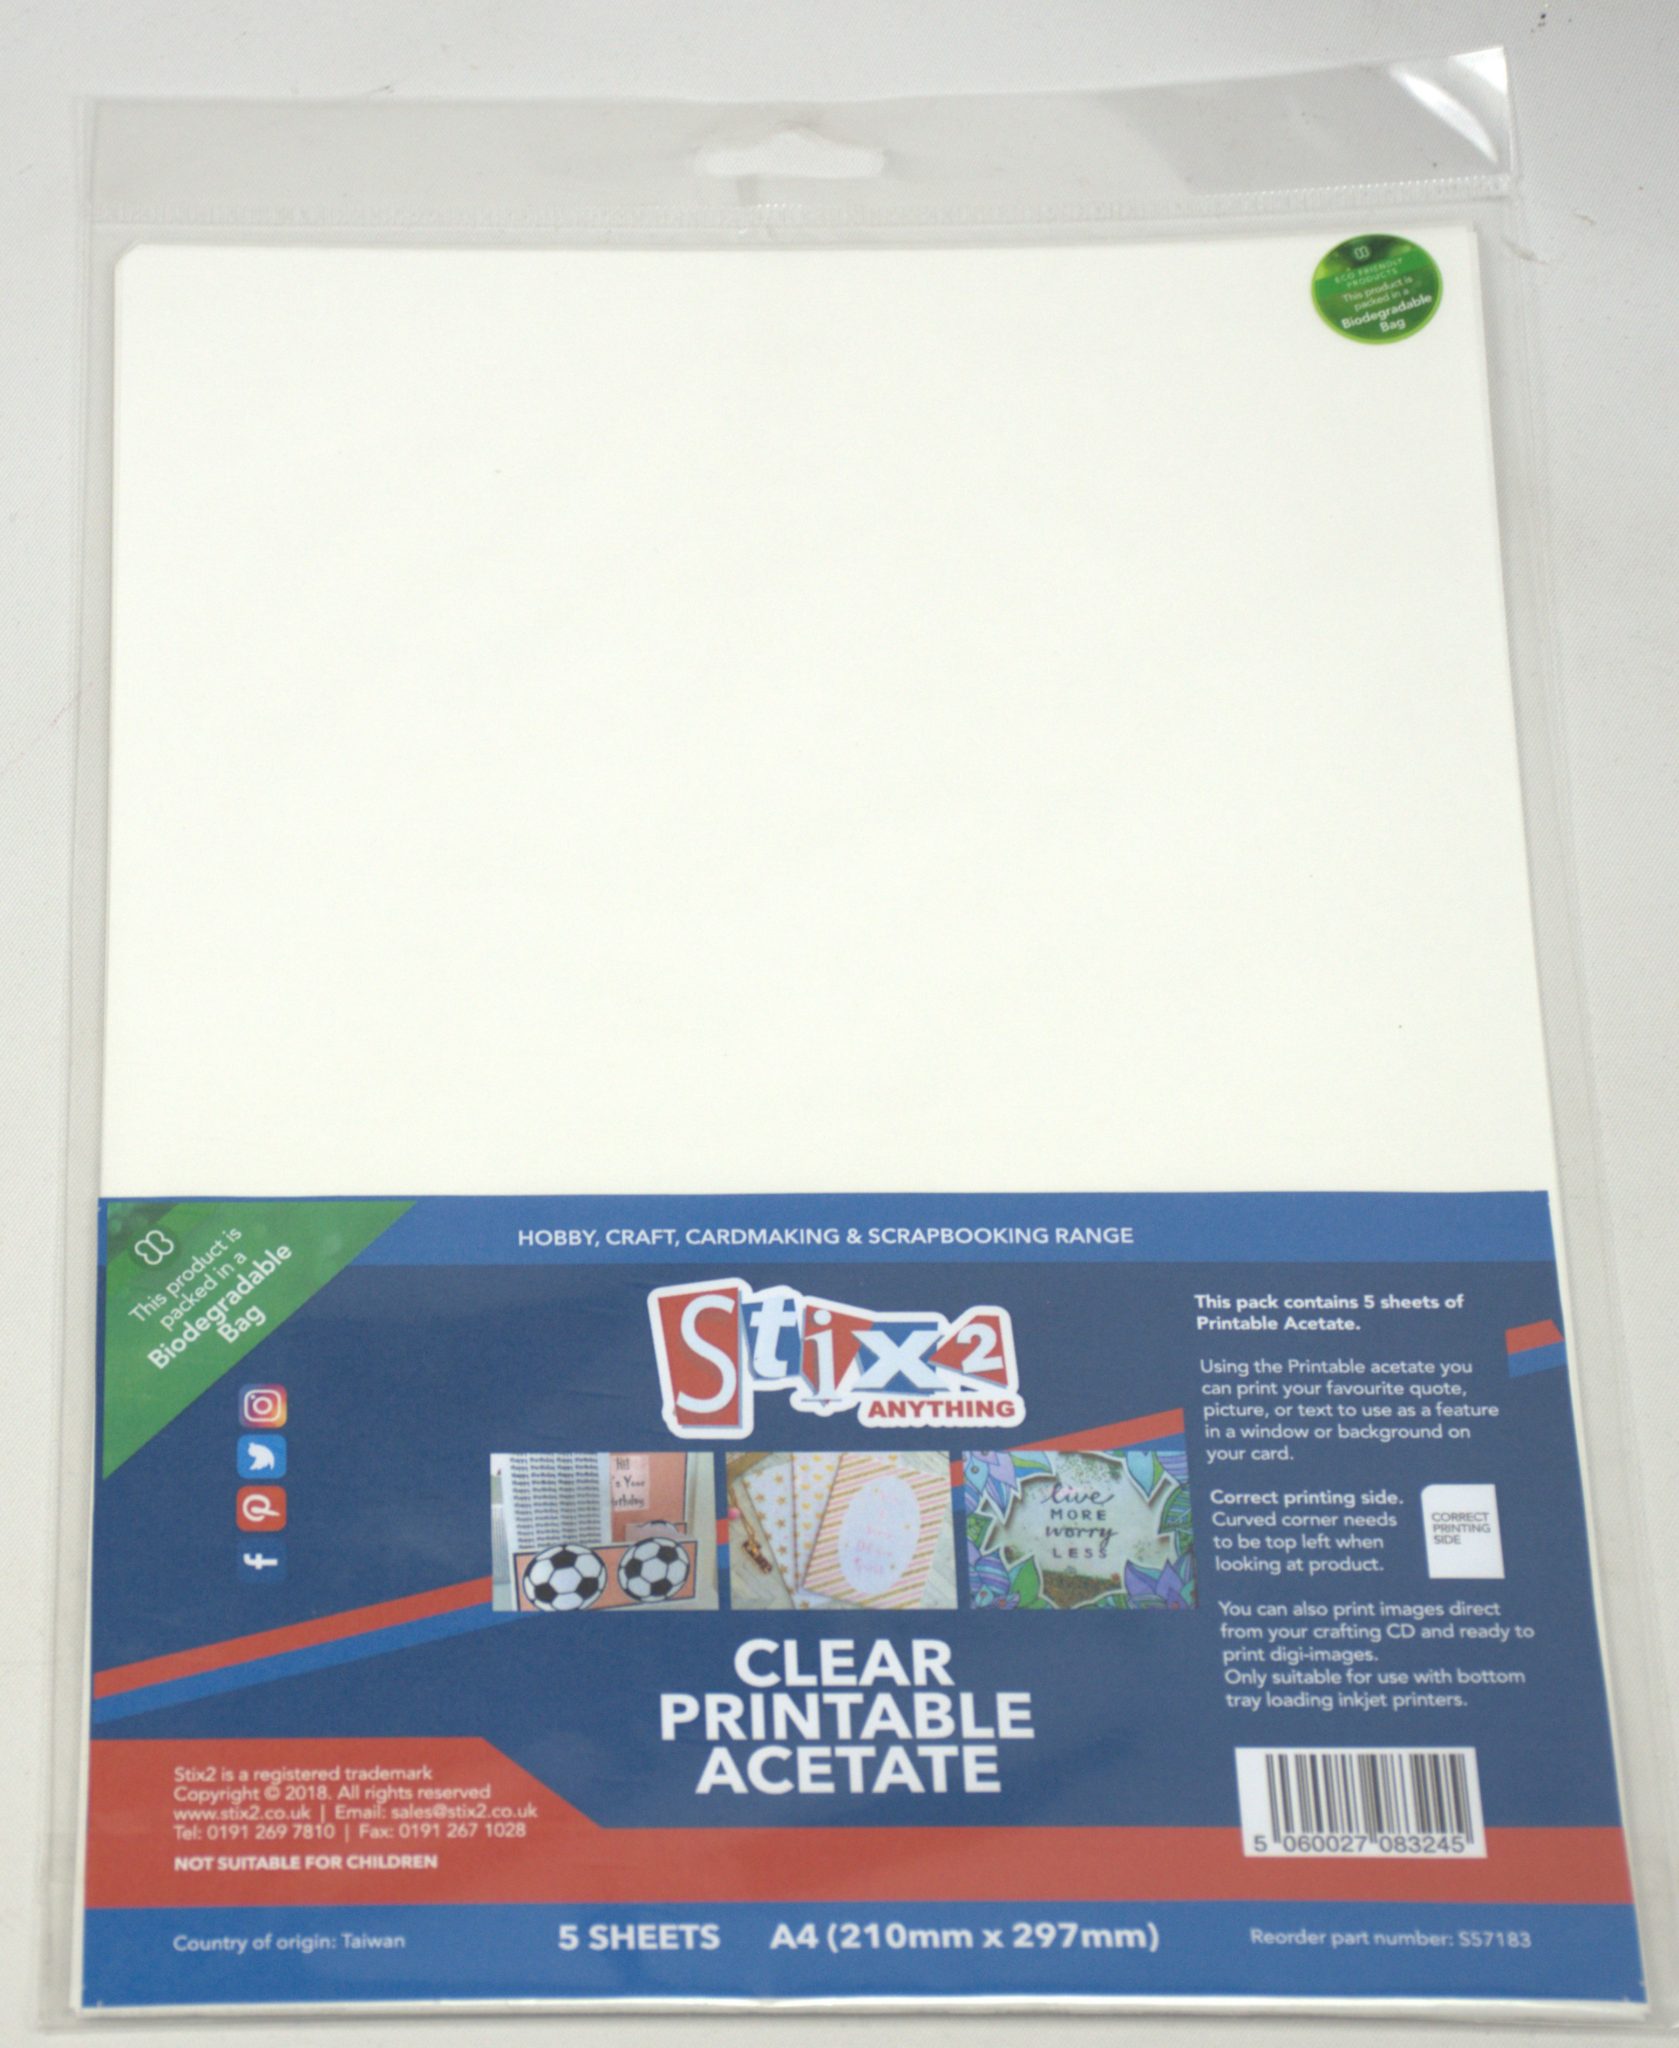 clear-printable-acetate-sheets-inkjet-printer-100-micron-thick